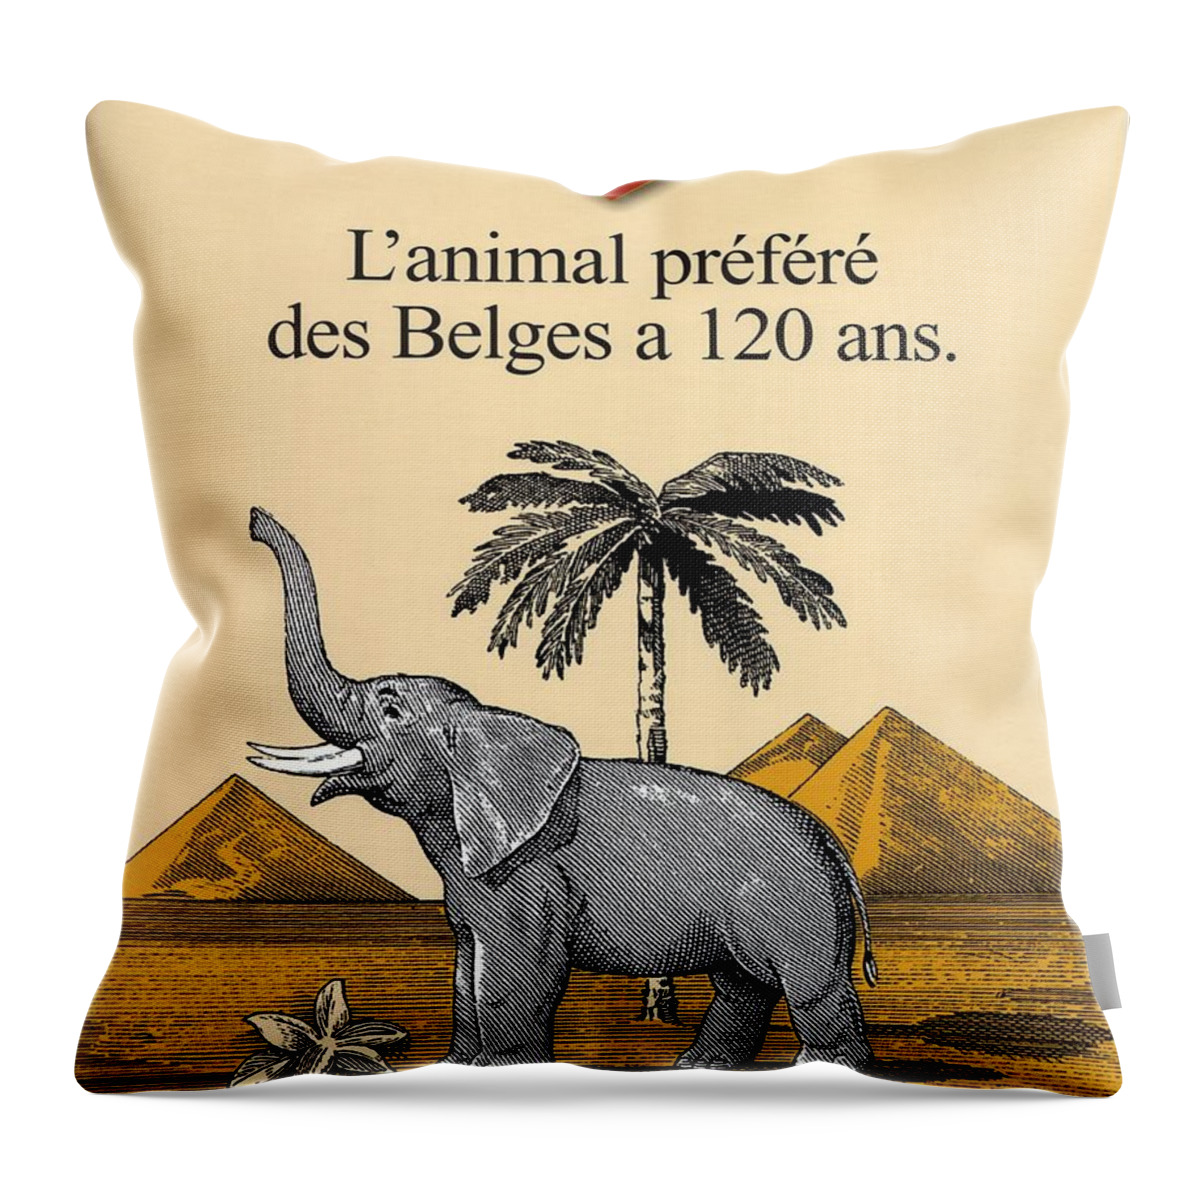 Cote D'or Throw Pillow featuring the mixed media Cote d'Or Chocolate - Belgian Chocolate - Elephant near the Egyptian Pyramids - Vintage Poster by Studio Grafiikka